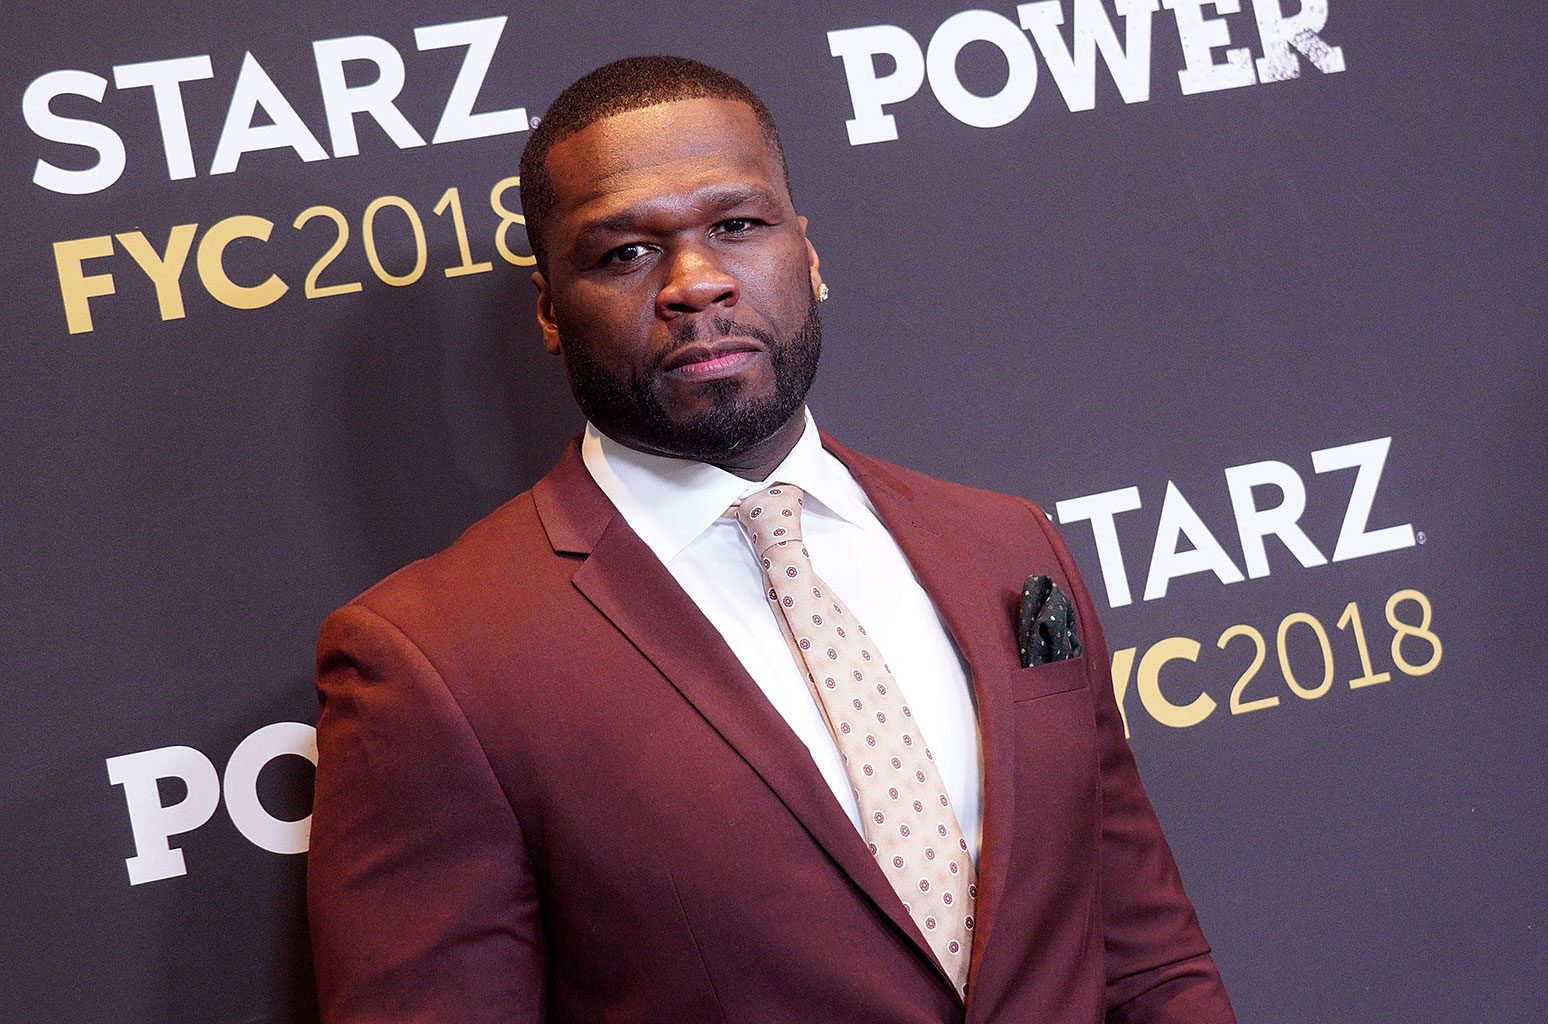 50 Cent Gives Son a Private Toys 'R' Us Shopping Spree for Christmas - www.billboard.com